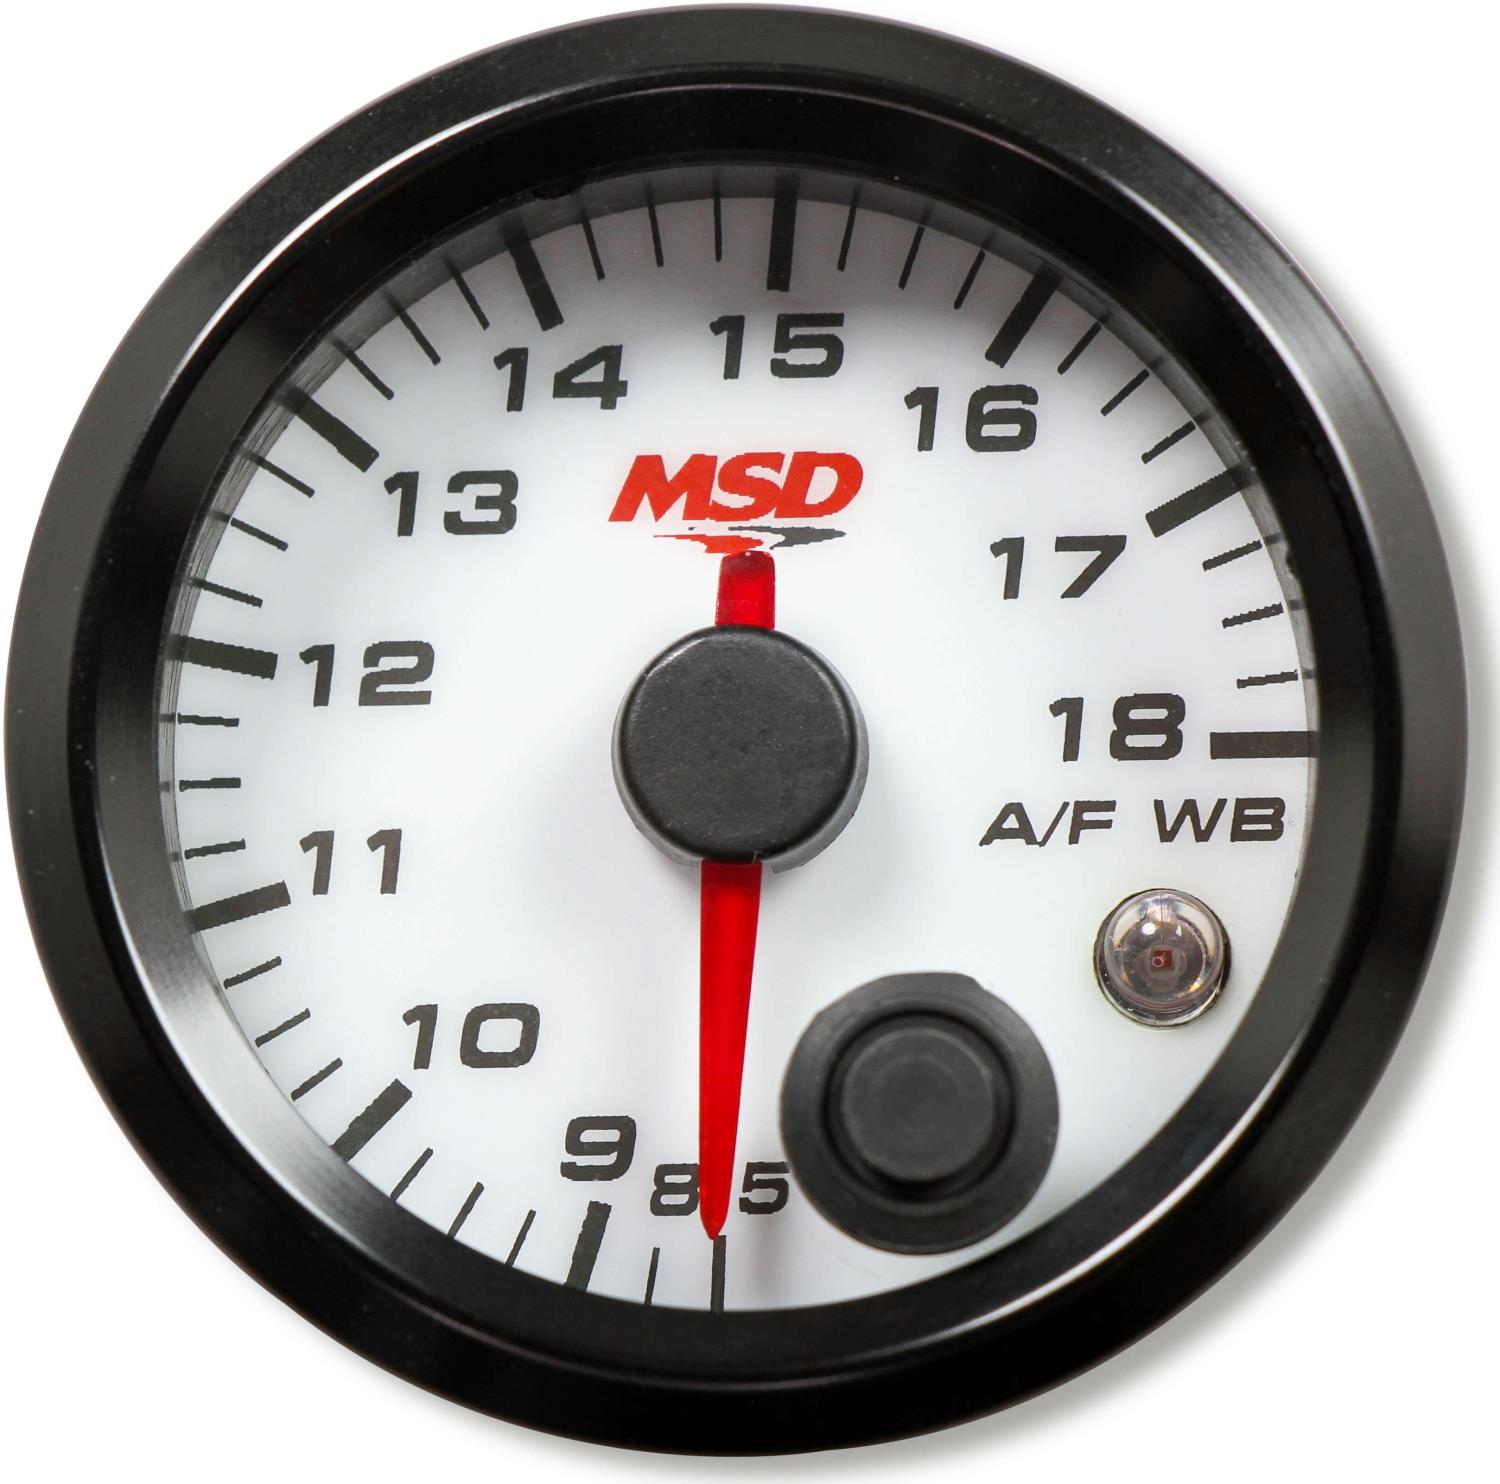 2 1/16 in. Analog Wideband Air/Fuel Ratio Gauge Kit - White Face with Black Bezel